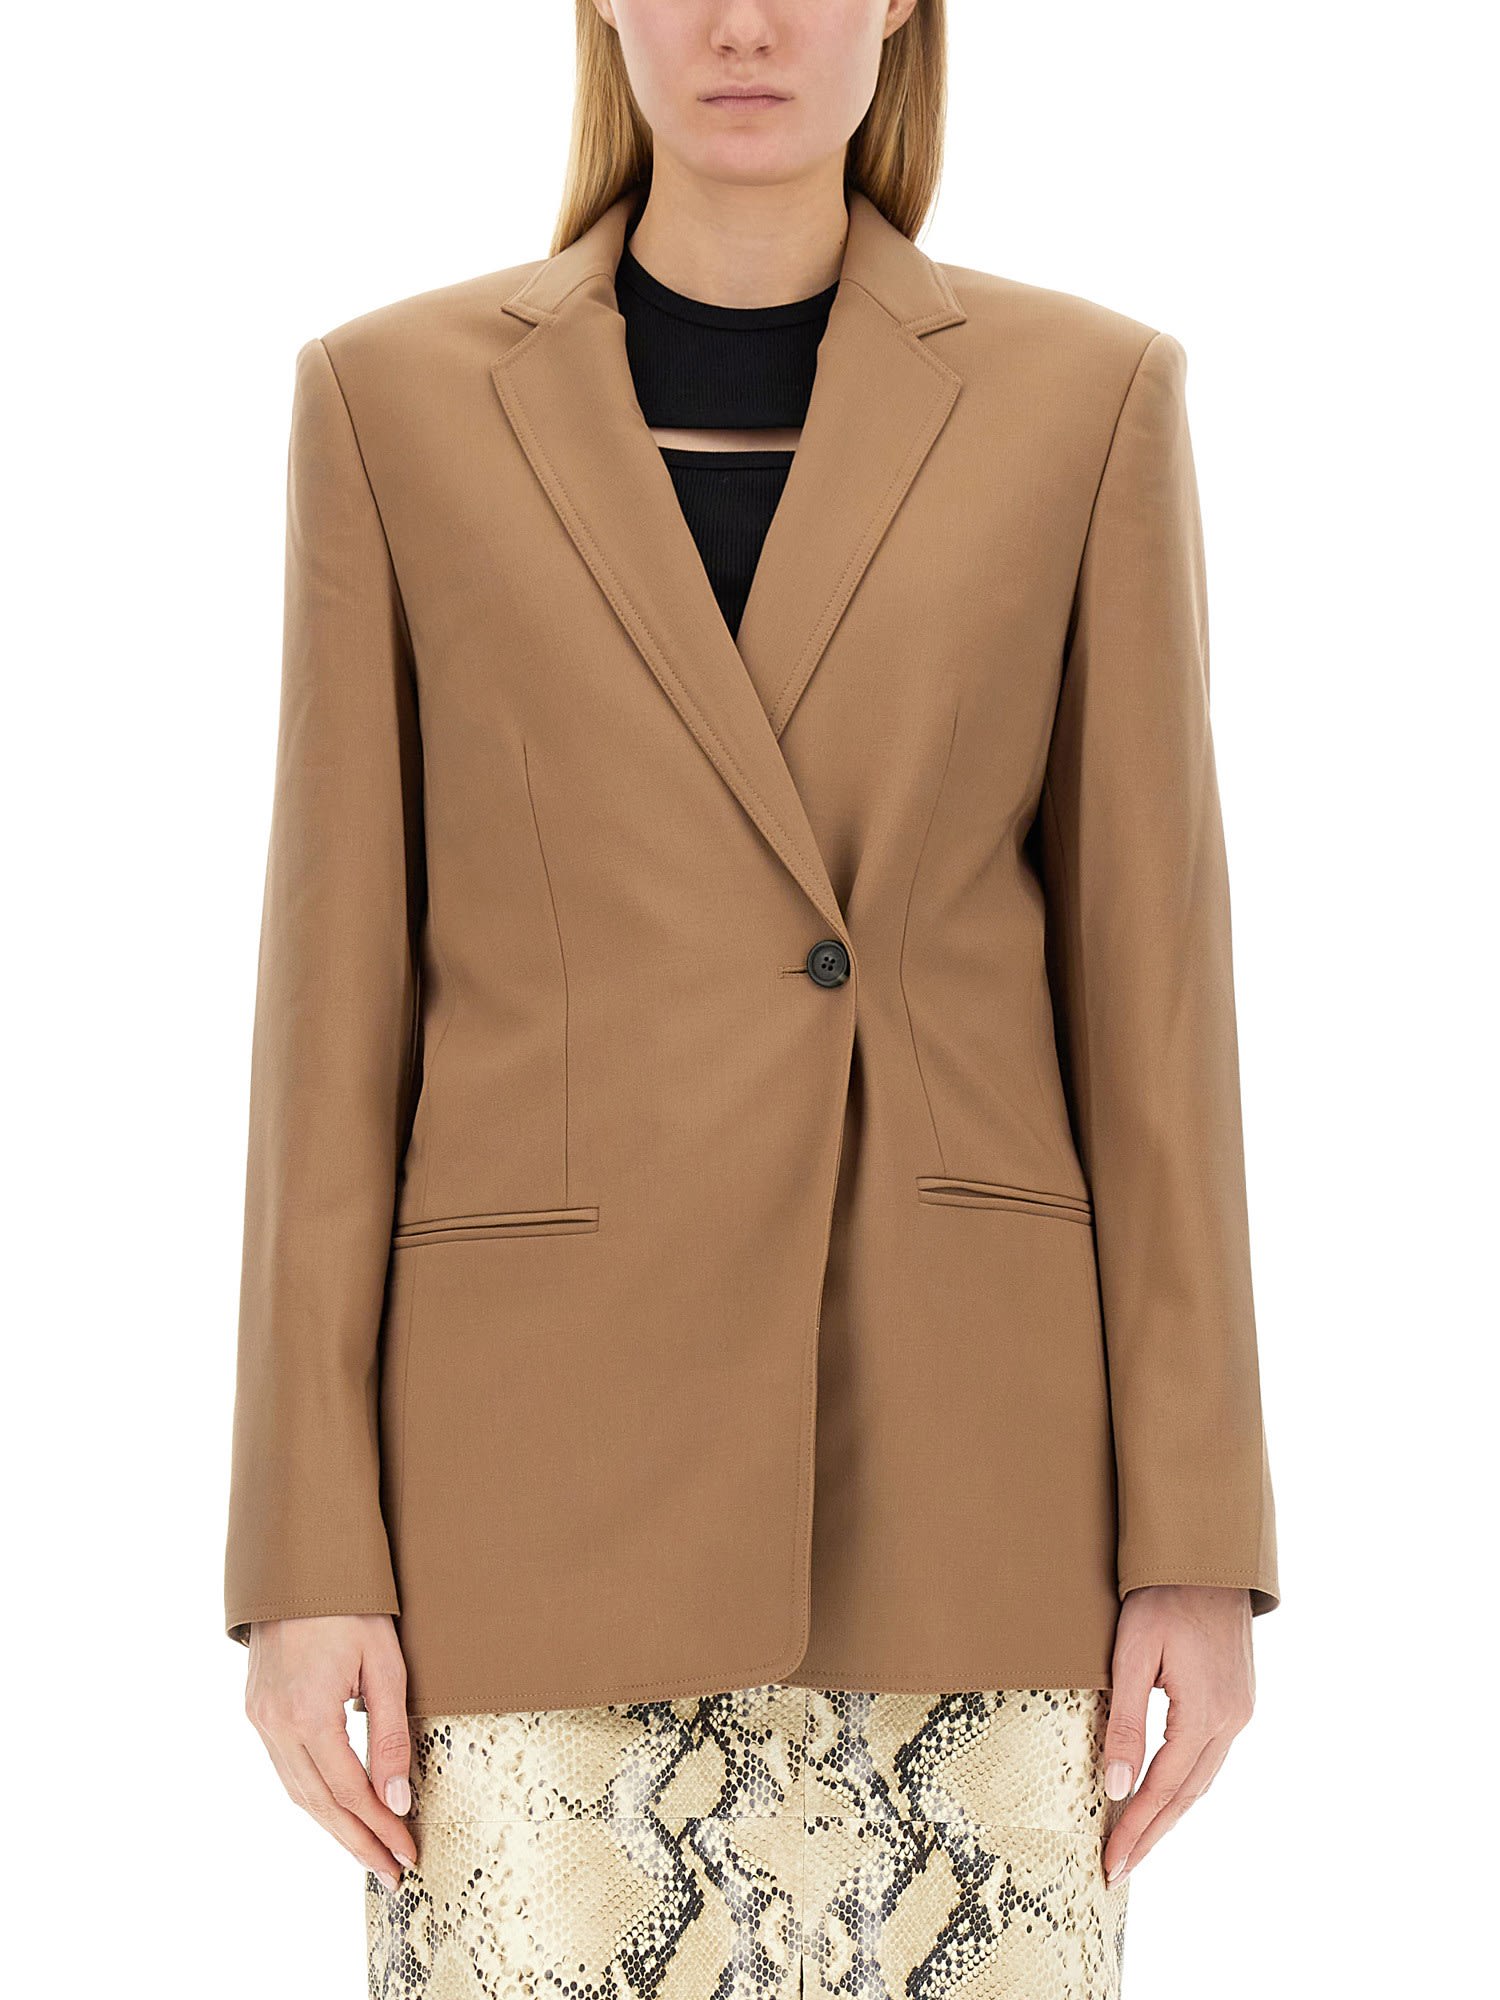 helmut lang single-double breasted blazer